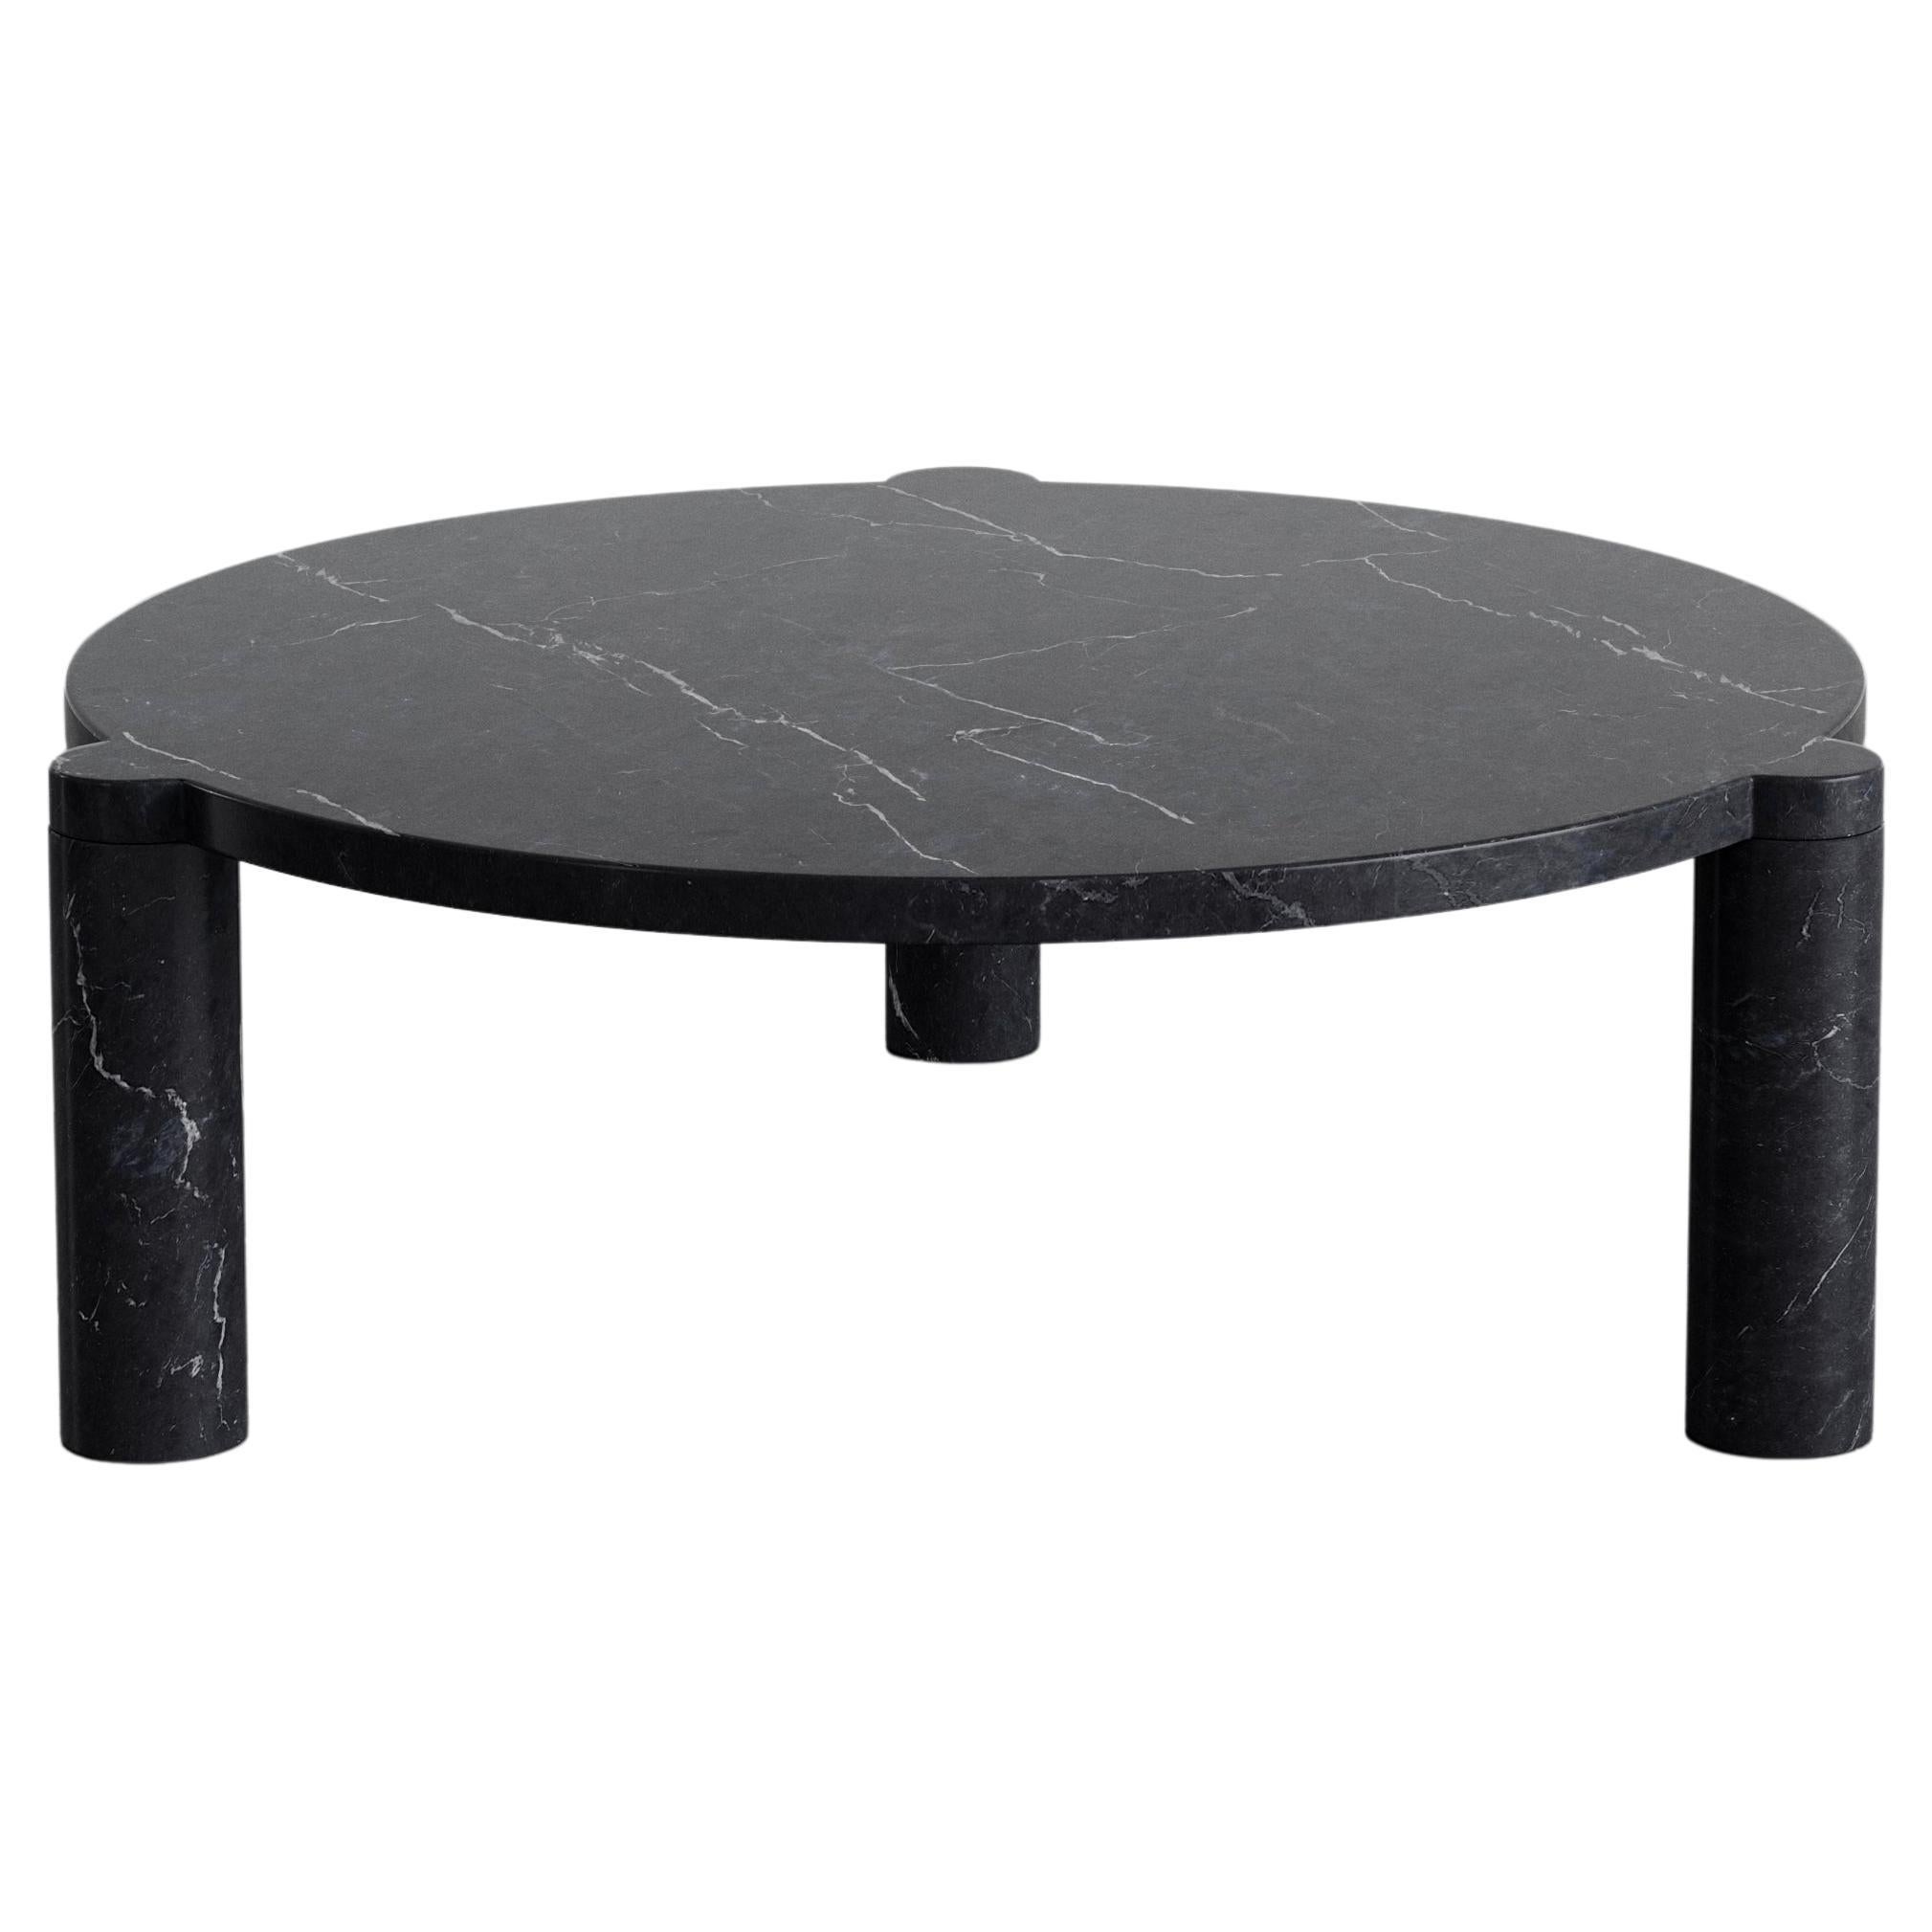 Alexis 90 Marble Coffee Table By Agglomerati